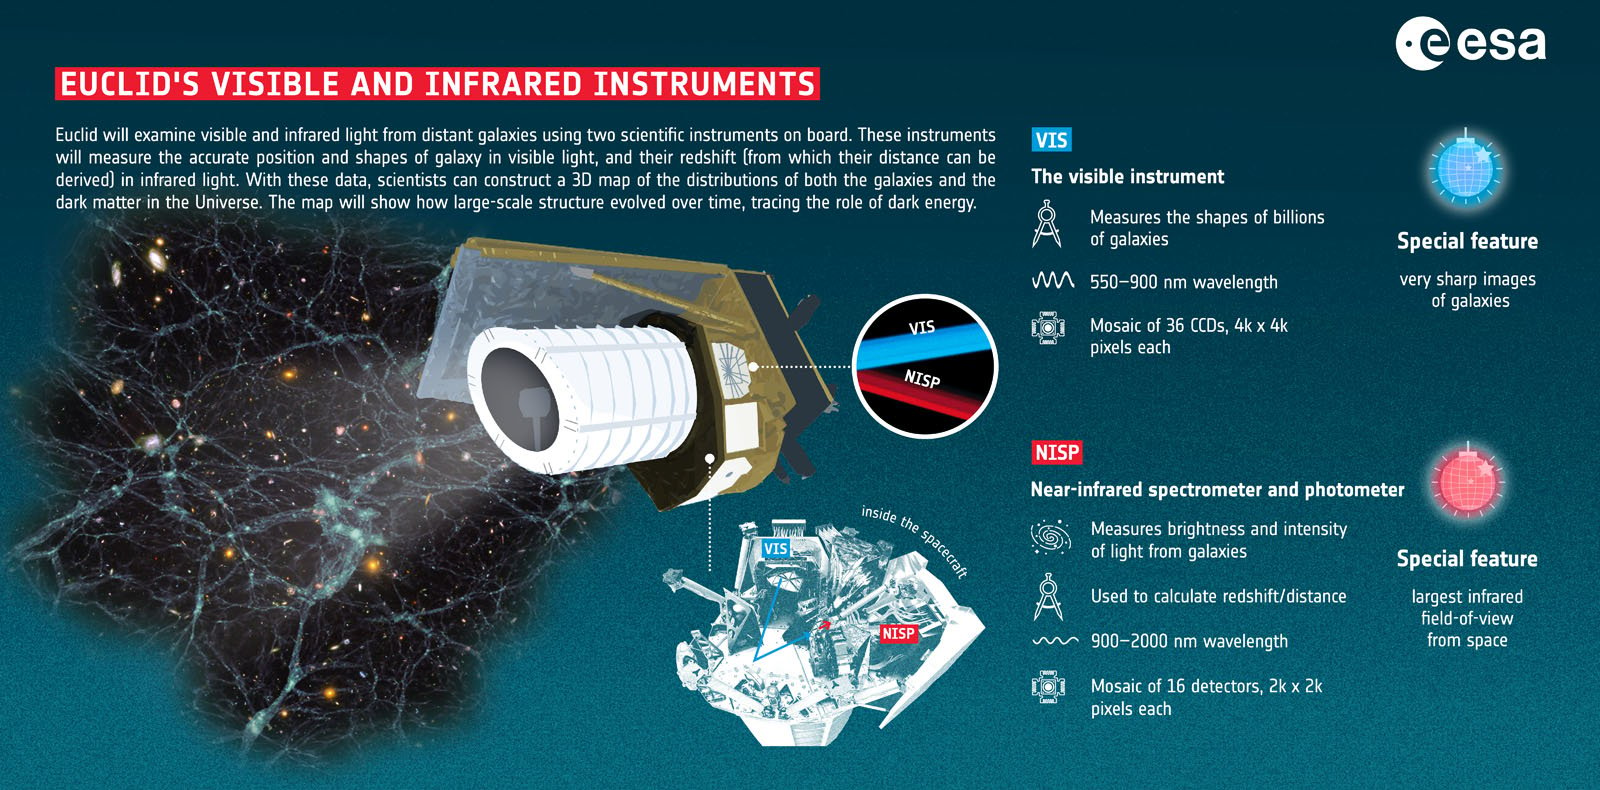 Infographic detailing Euclid's visible and infrared instruments used to study distant galaxies. Features VIS for visible light, measuring 550-900 nm wavelengths, and NISP for infrared, measuring 900-2000 nm with photometry and spectroscopy.